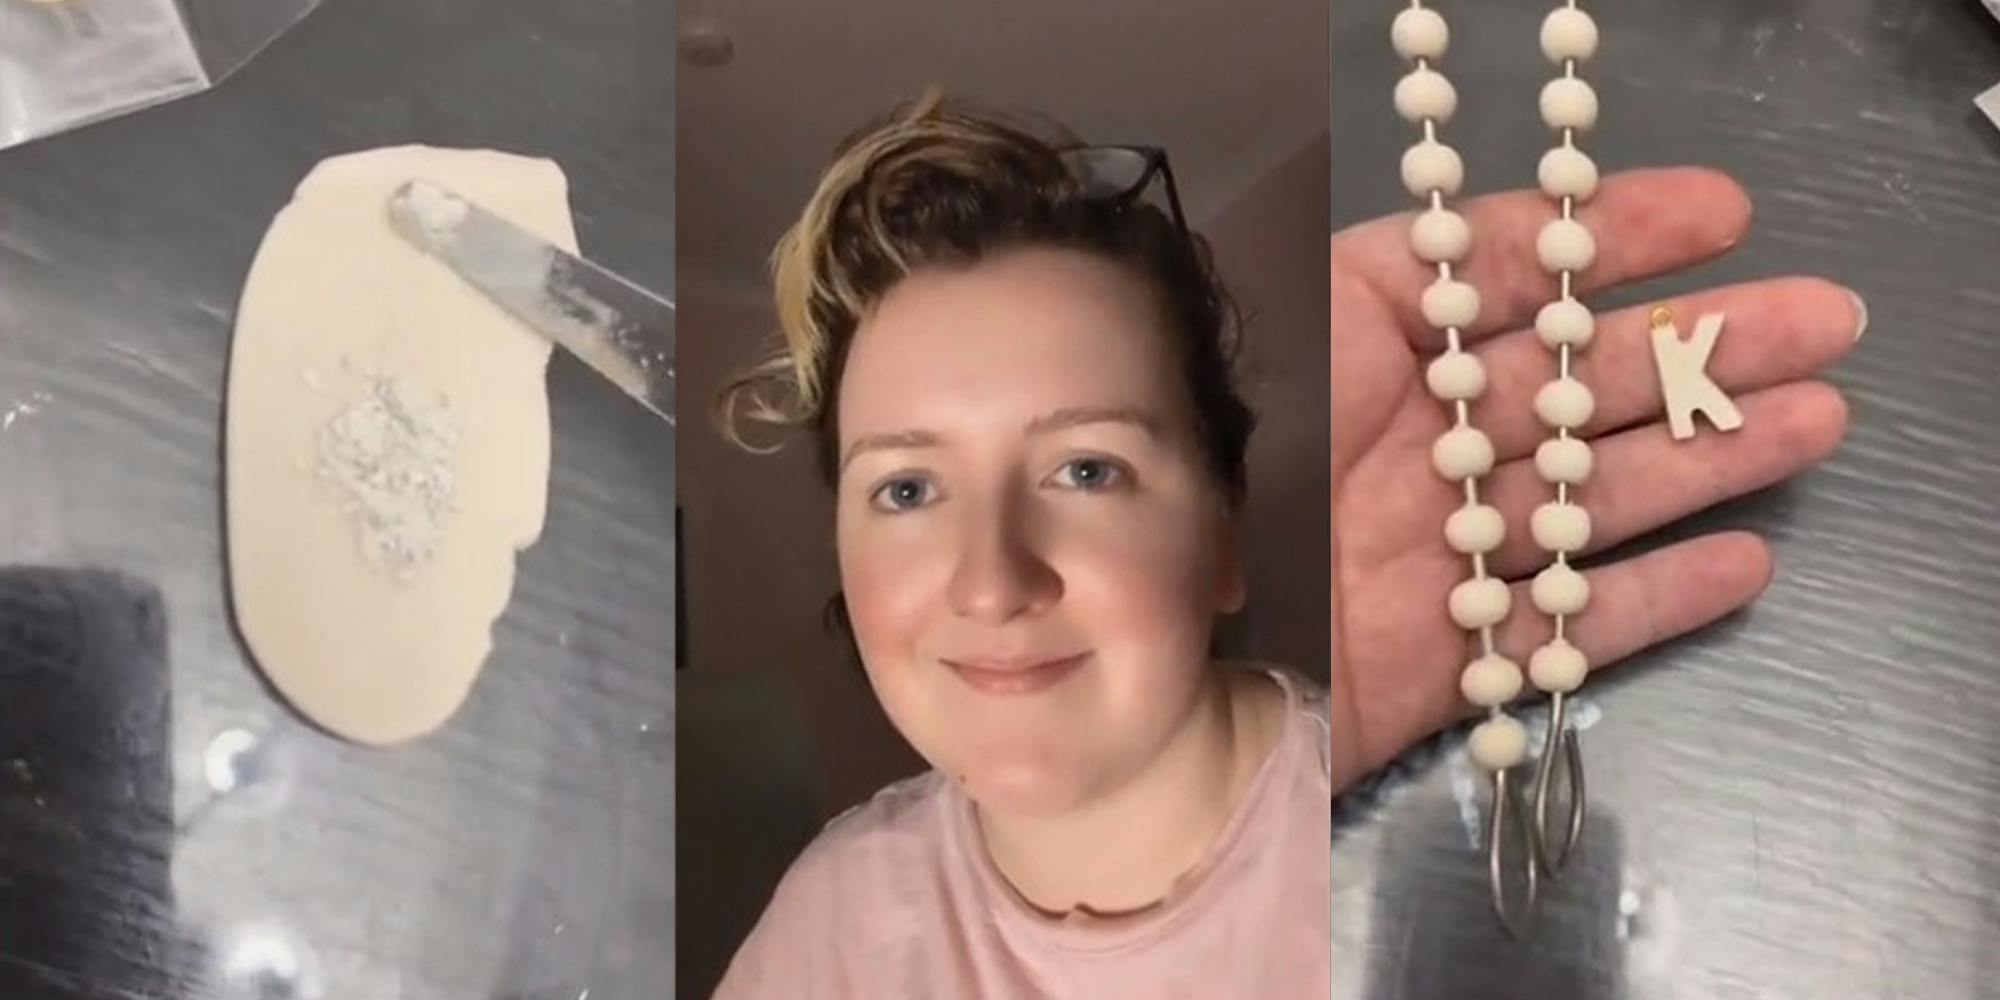 ‘It’s not bedazzled… it’s bejizzled?’: Woman uses ‘powdered semen’ to create necklaces